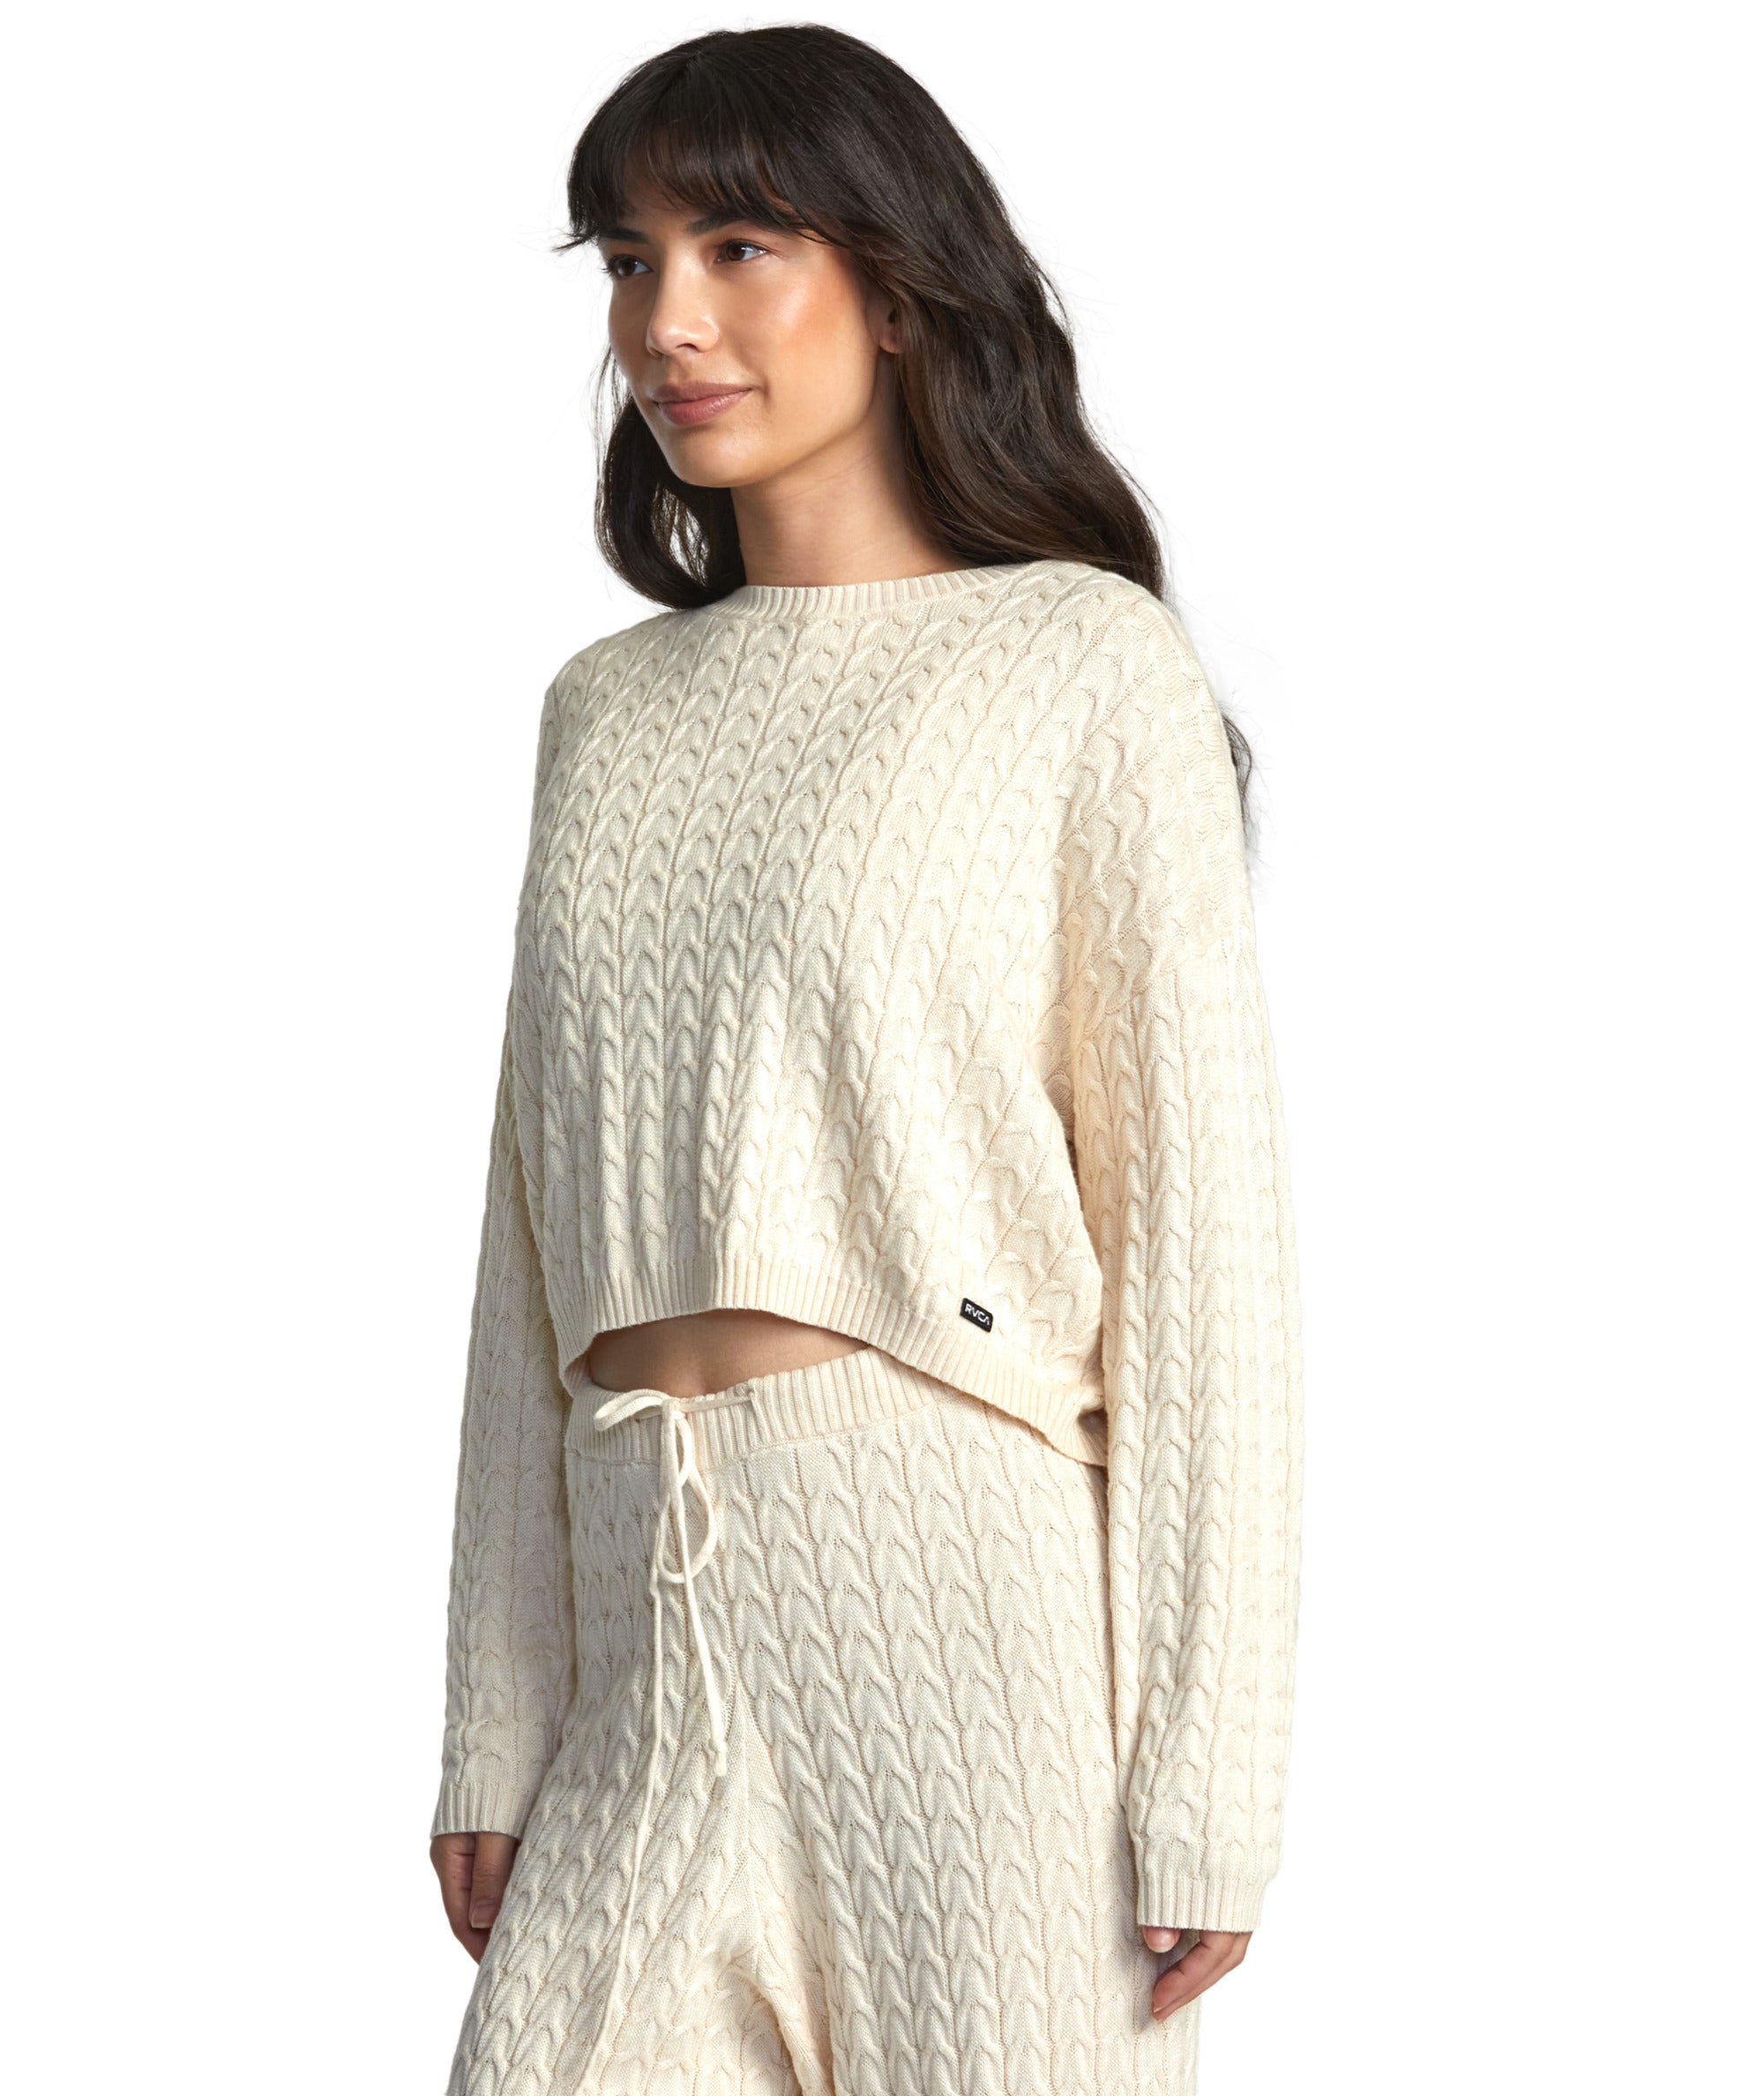 RVCA Women's Soft Cable Sweater